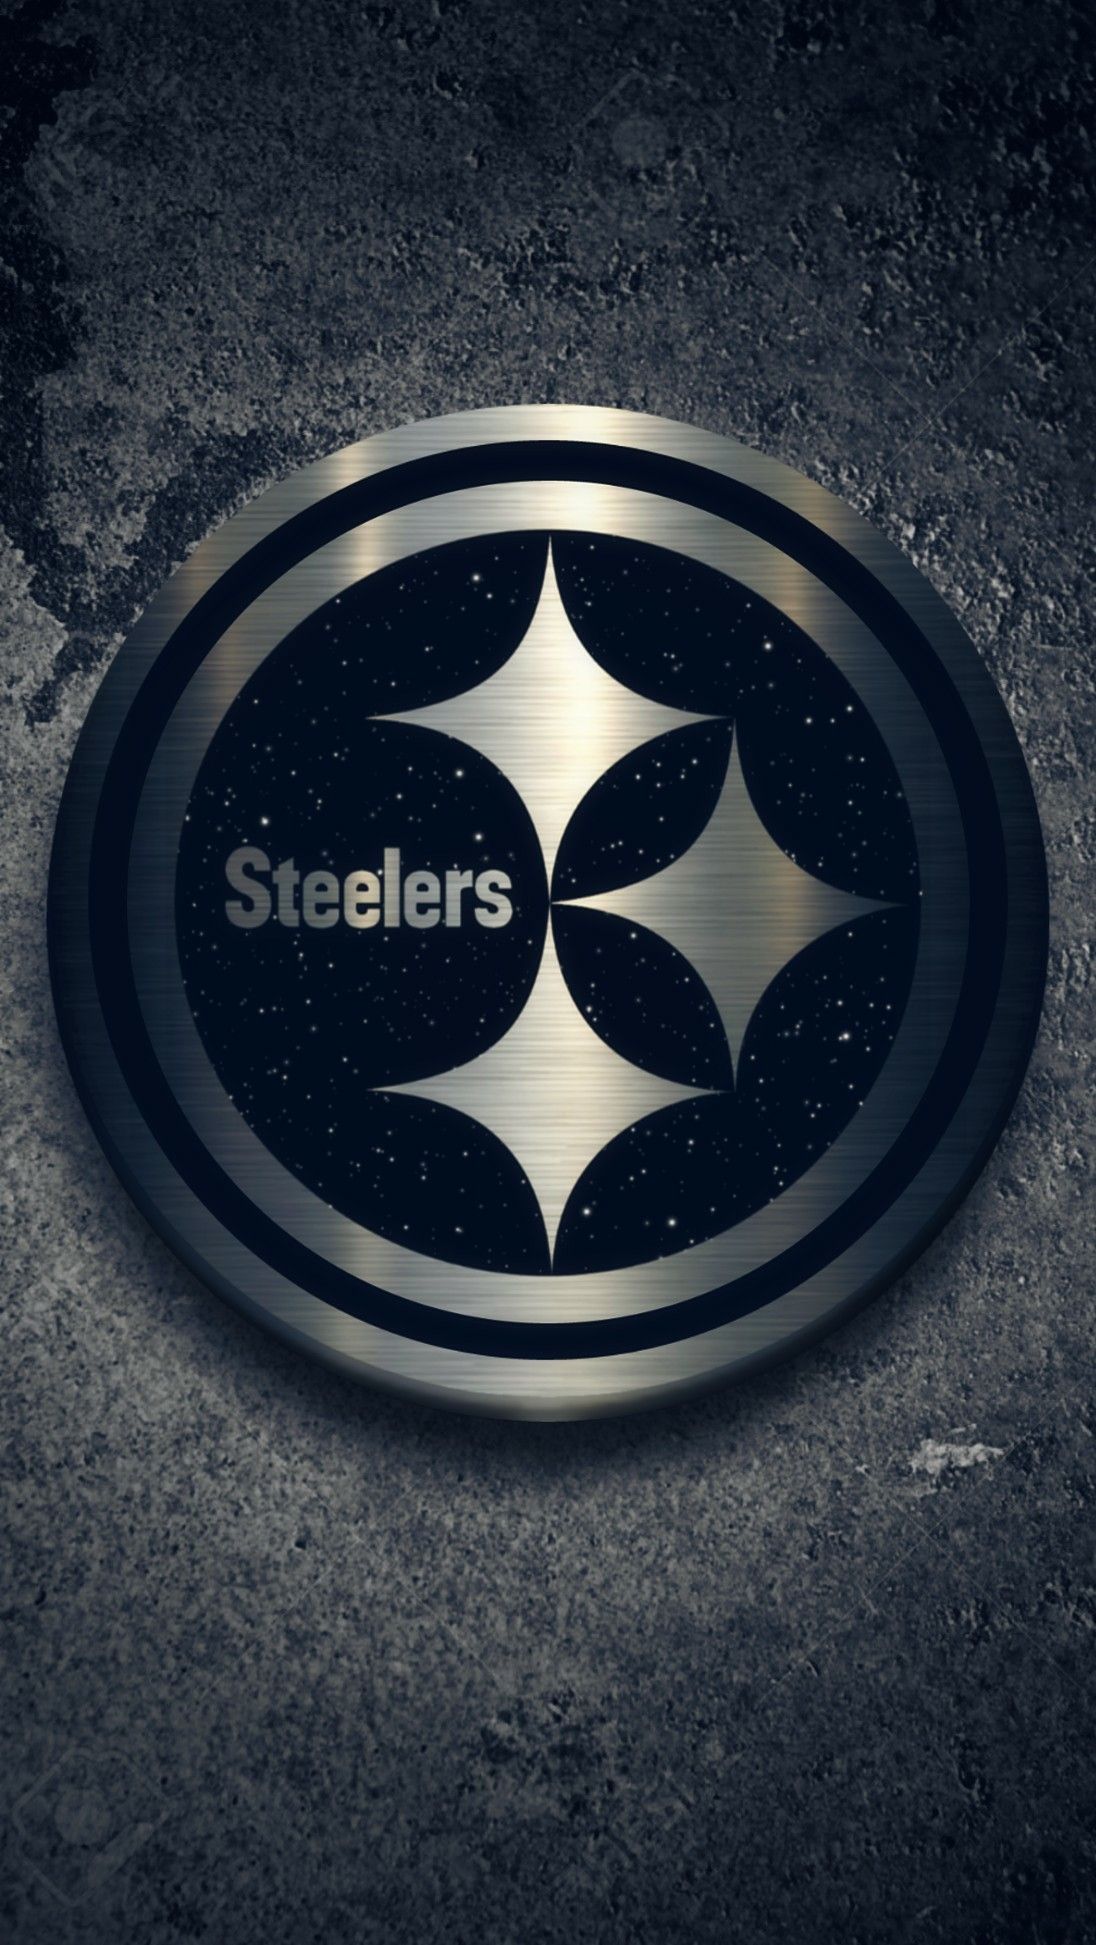 Abstract Steelers Wallpaper On